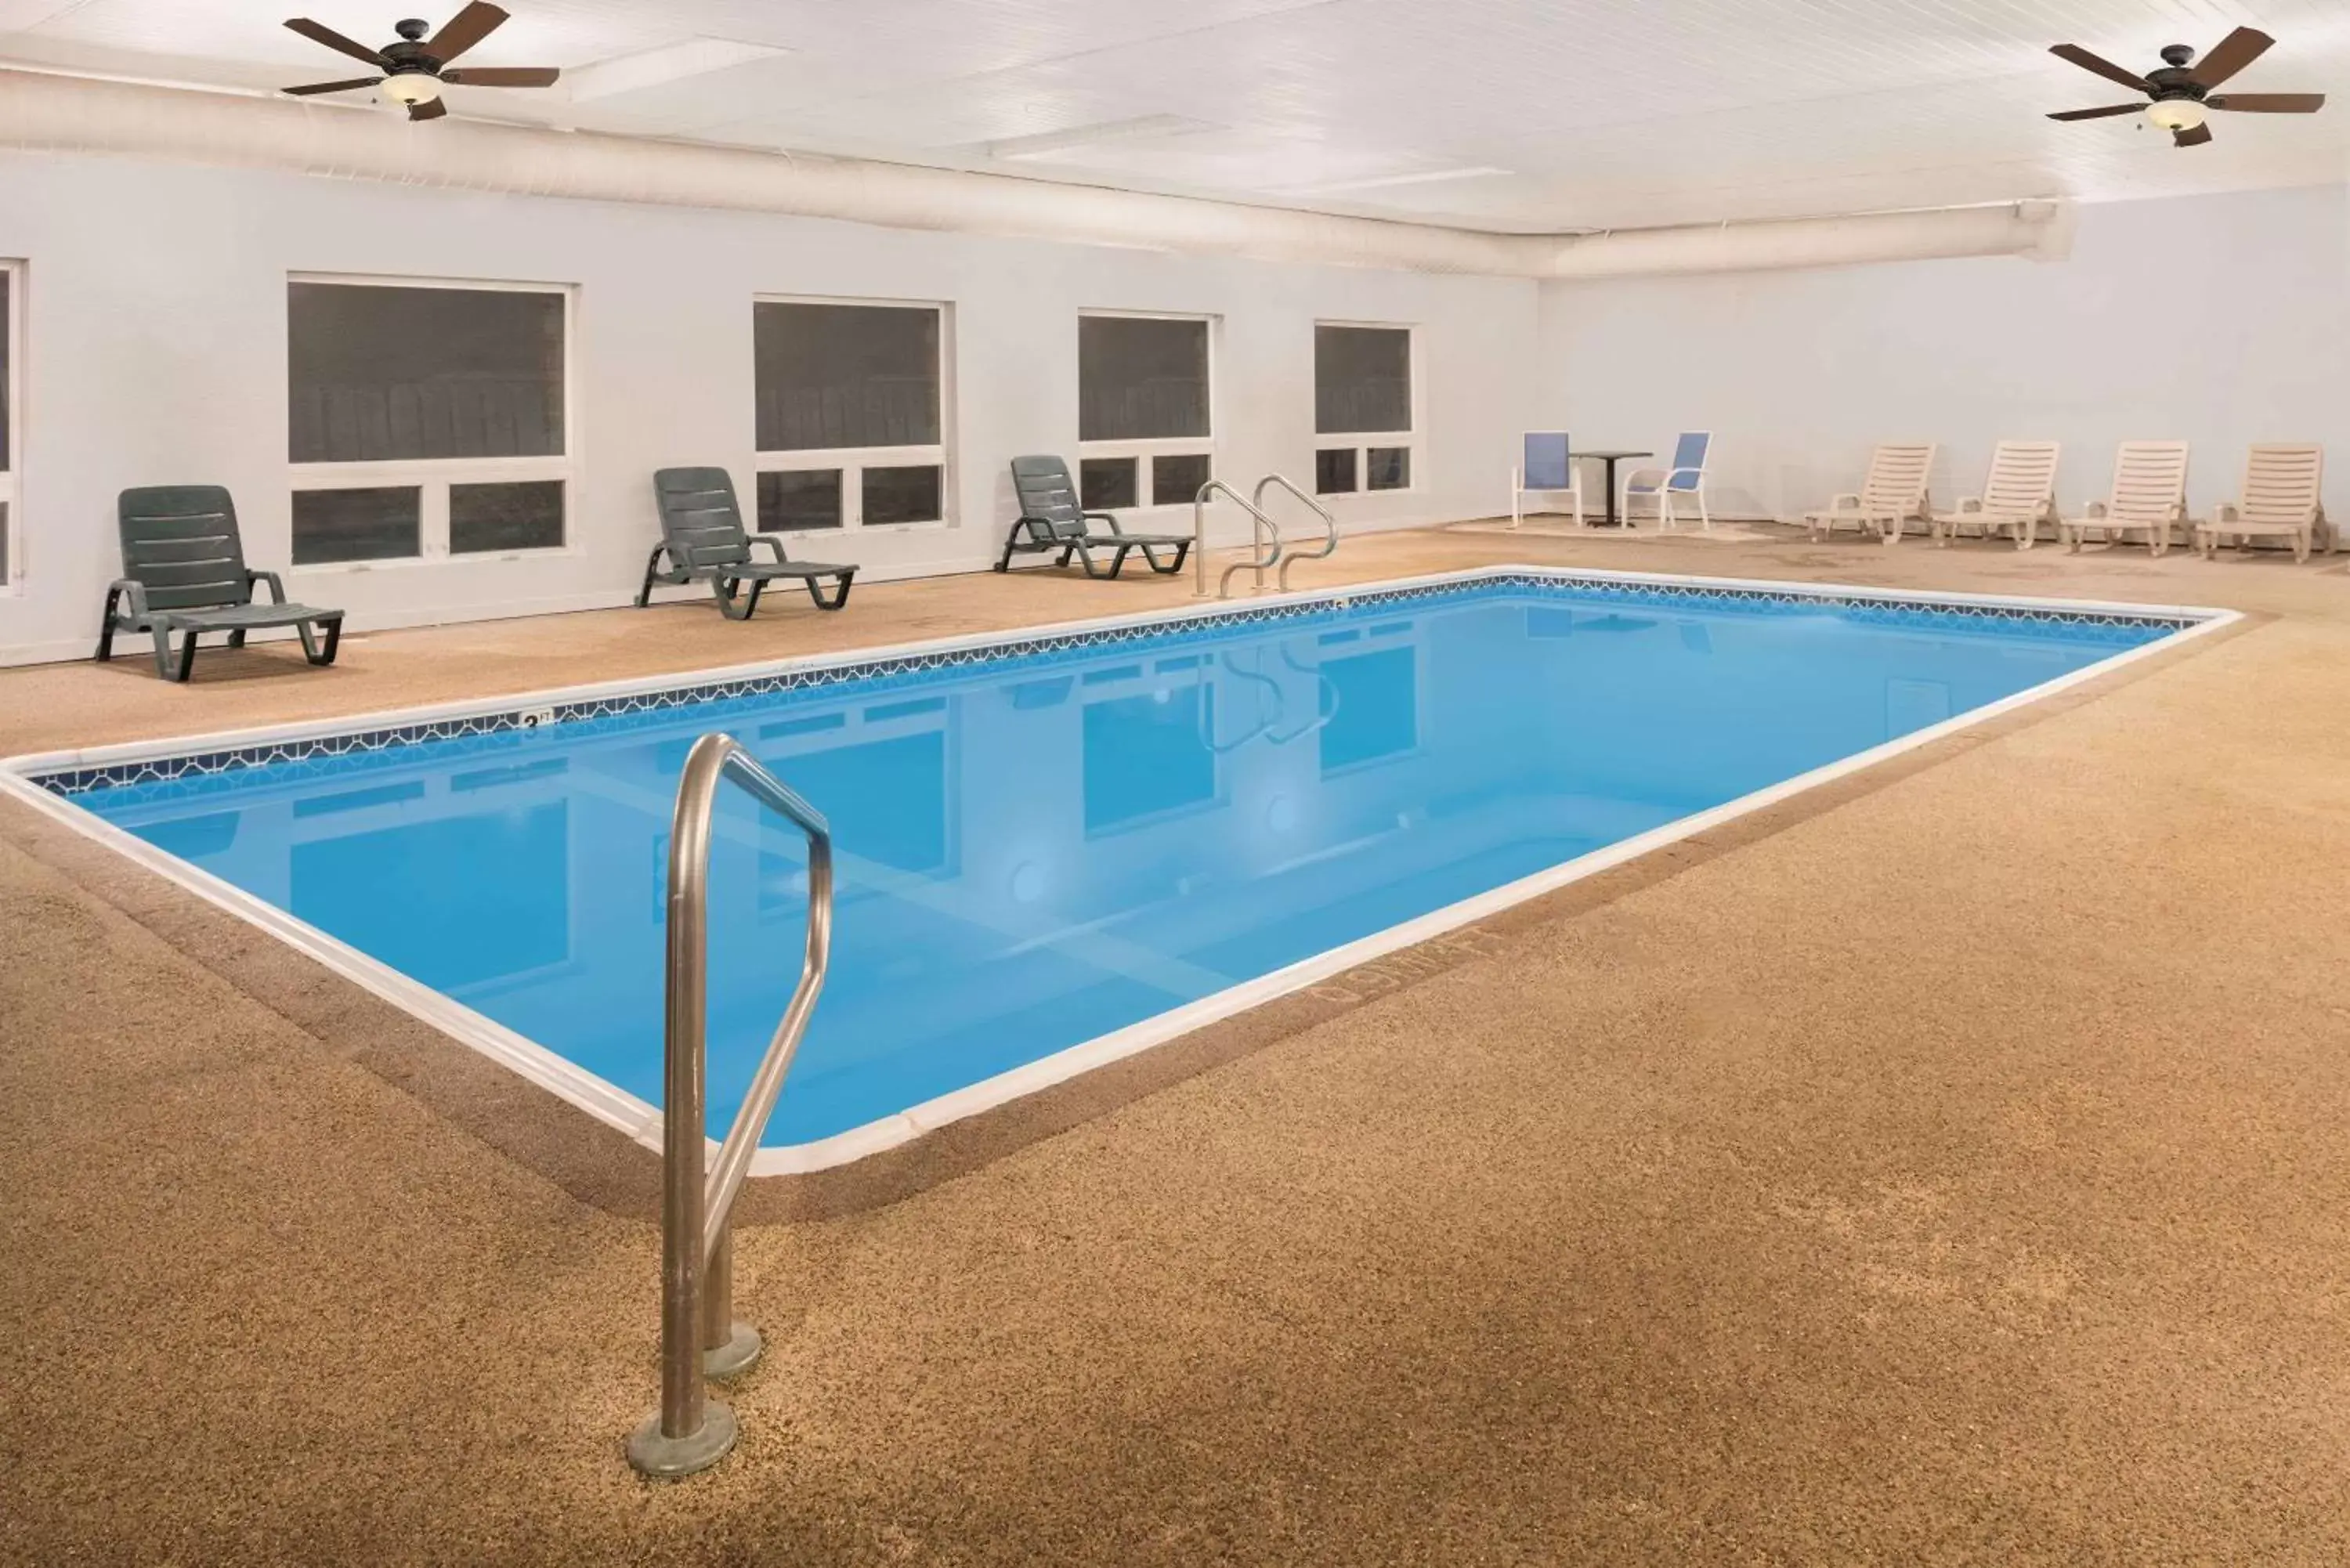 On site, Swimming Pool in Days Inn by Wyndham Osage Beach Lake of the Ozarks